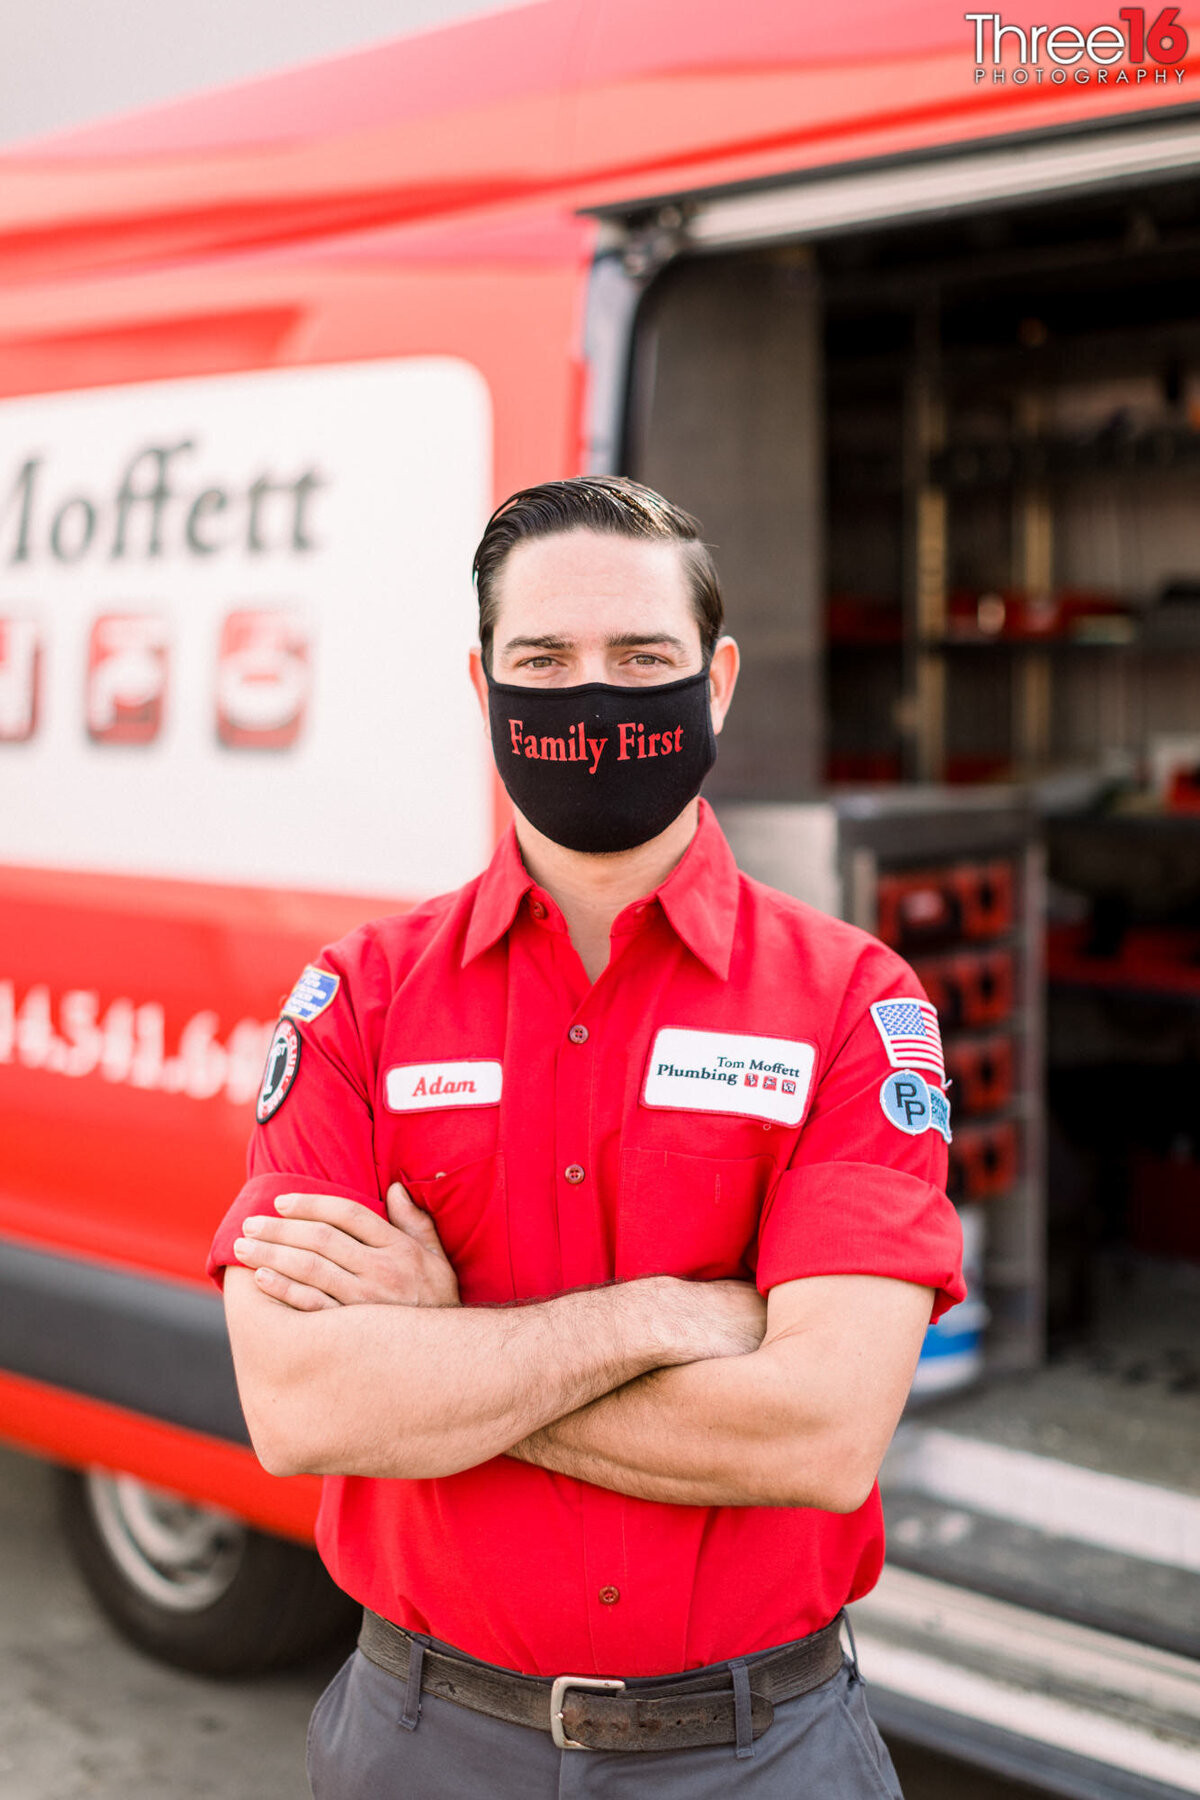 Plumber poses for photos while wearing his Covid mask